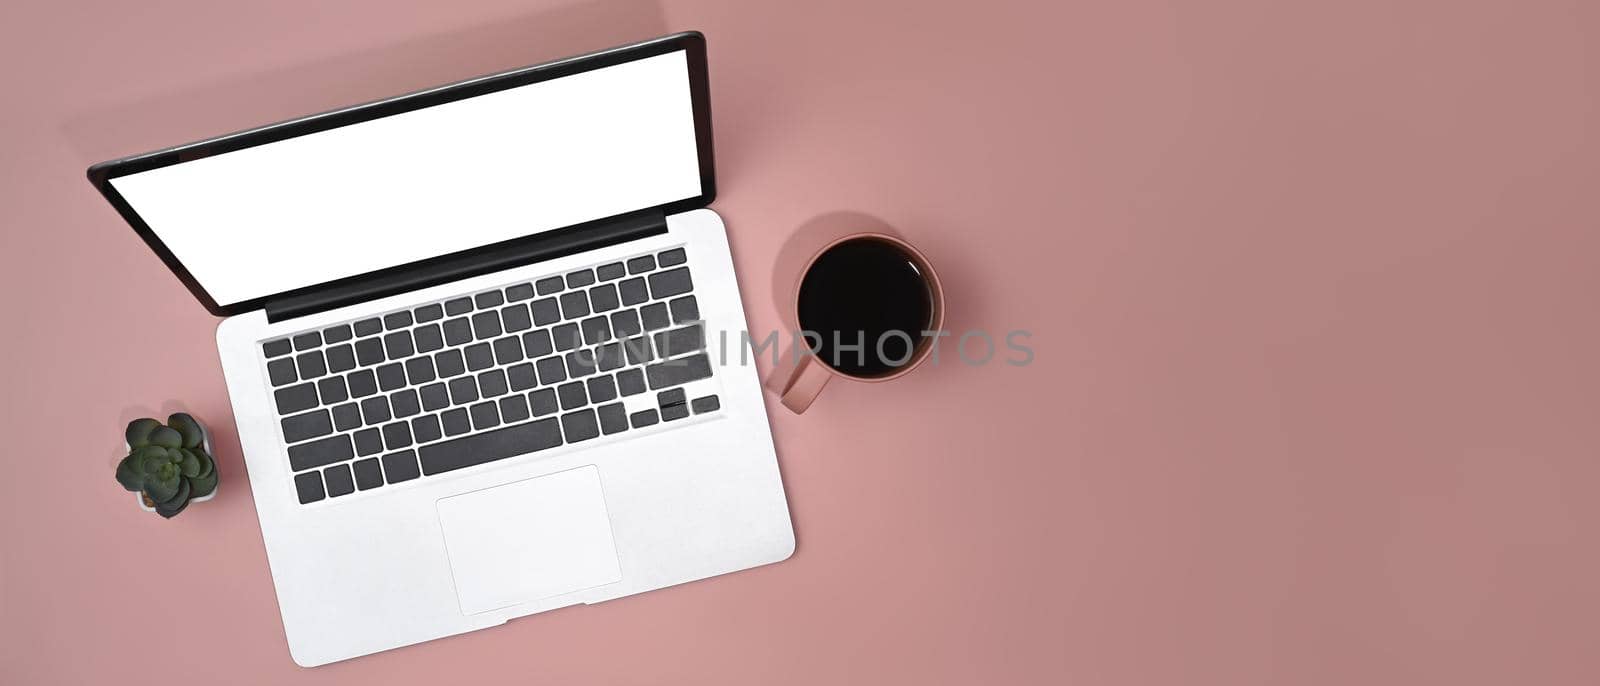 Mock up laptop computer with empty screen, coffee cup and succulent plant on pink background. Top view, Flat lay with copy space.